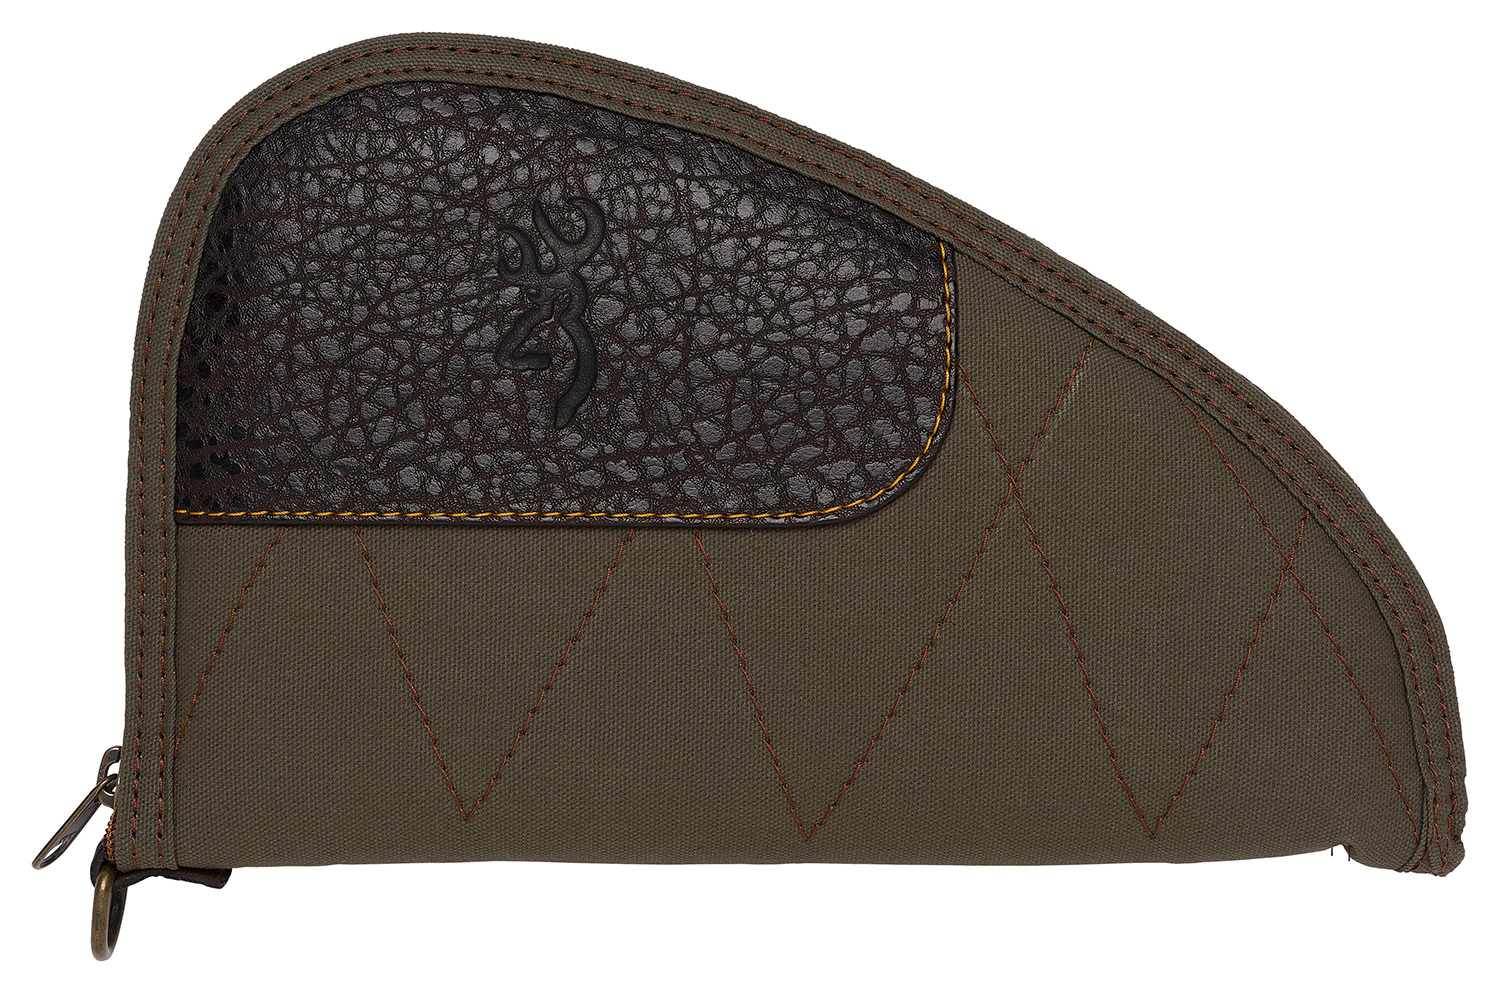 Browning 1435048411 Laredo Pistol Rug made of Cotton Canvas with Leather Trim, Olive Finish with Brown Accents, Felt Lining, Open Cell Foam Padding & Zipper